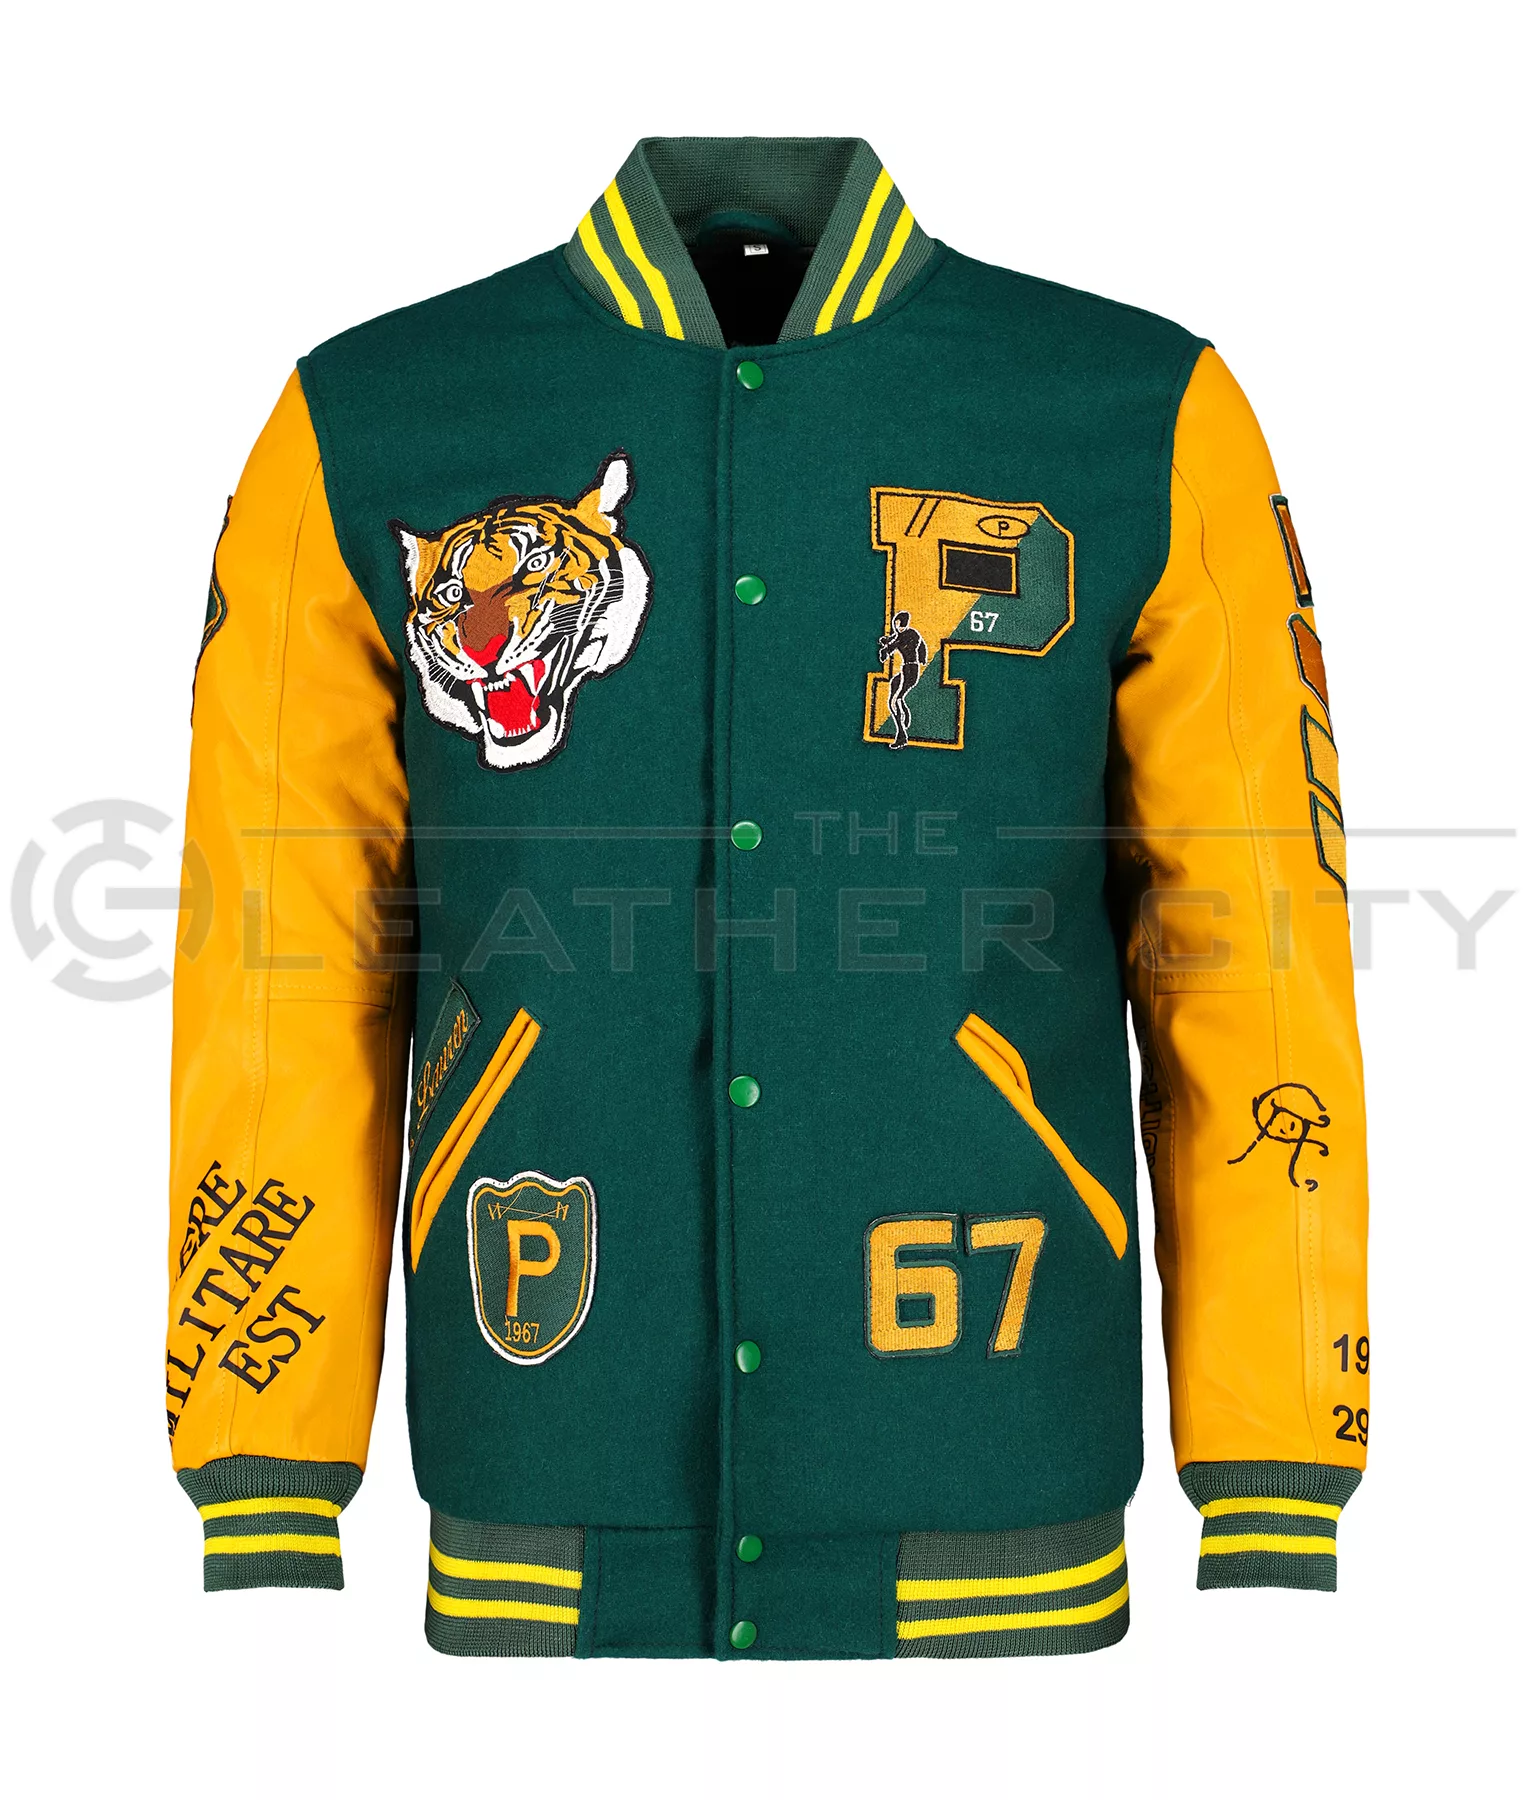 Polo RL Tiger Wool with Leather Varsity Jacket - The Leather City